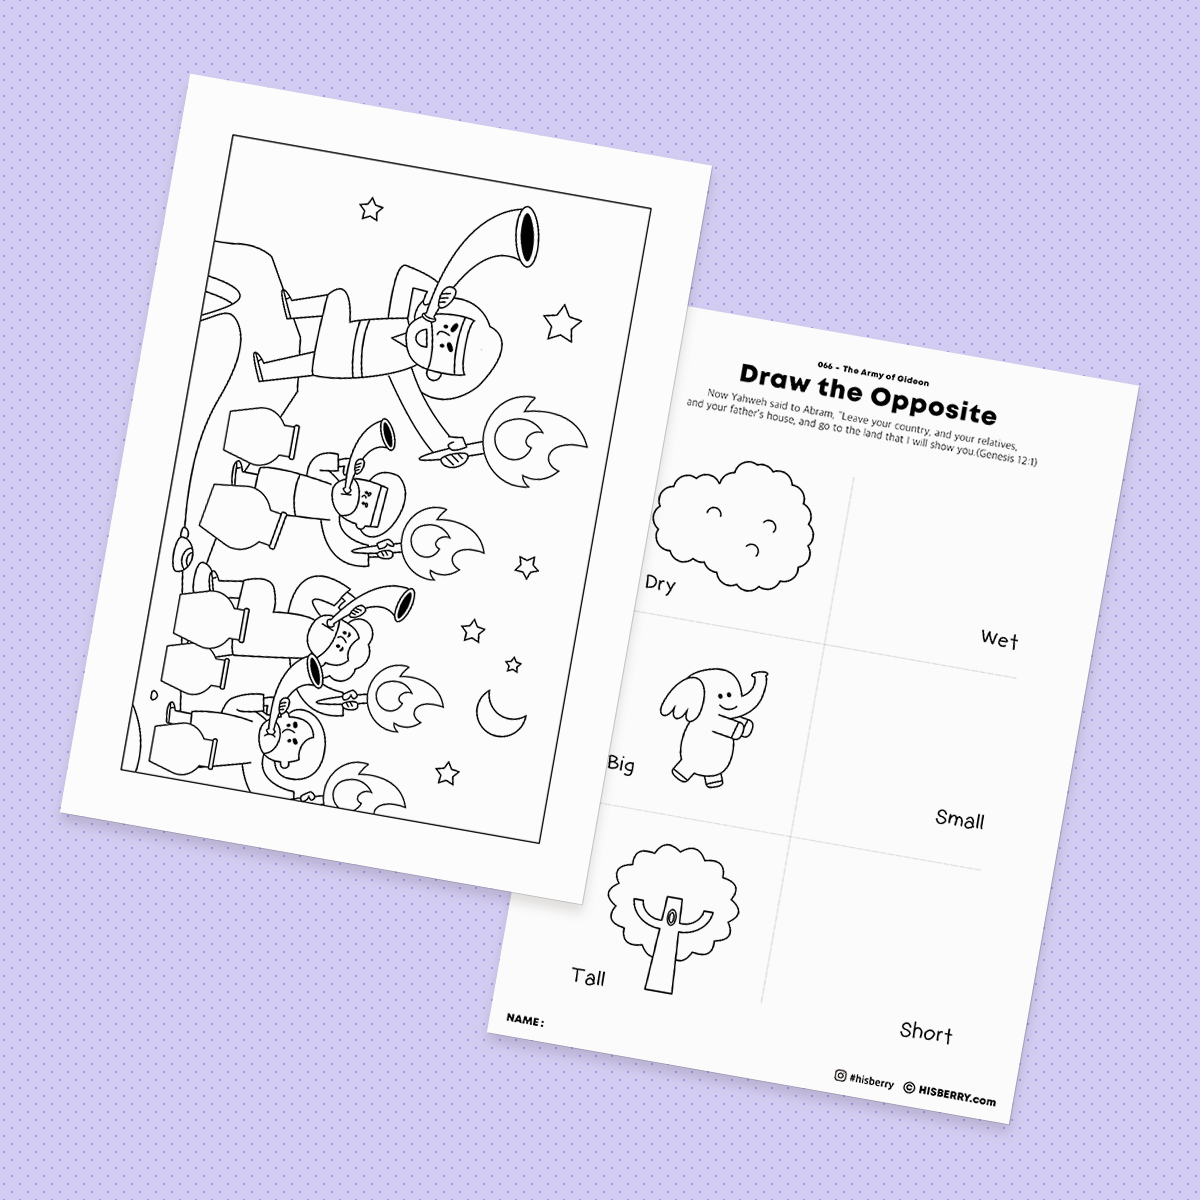 gideon bible story coloring pages